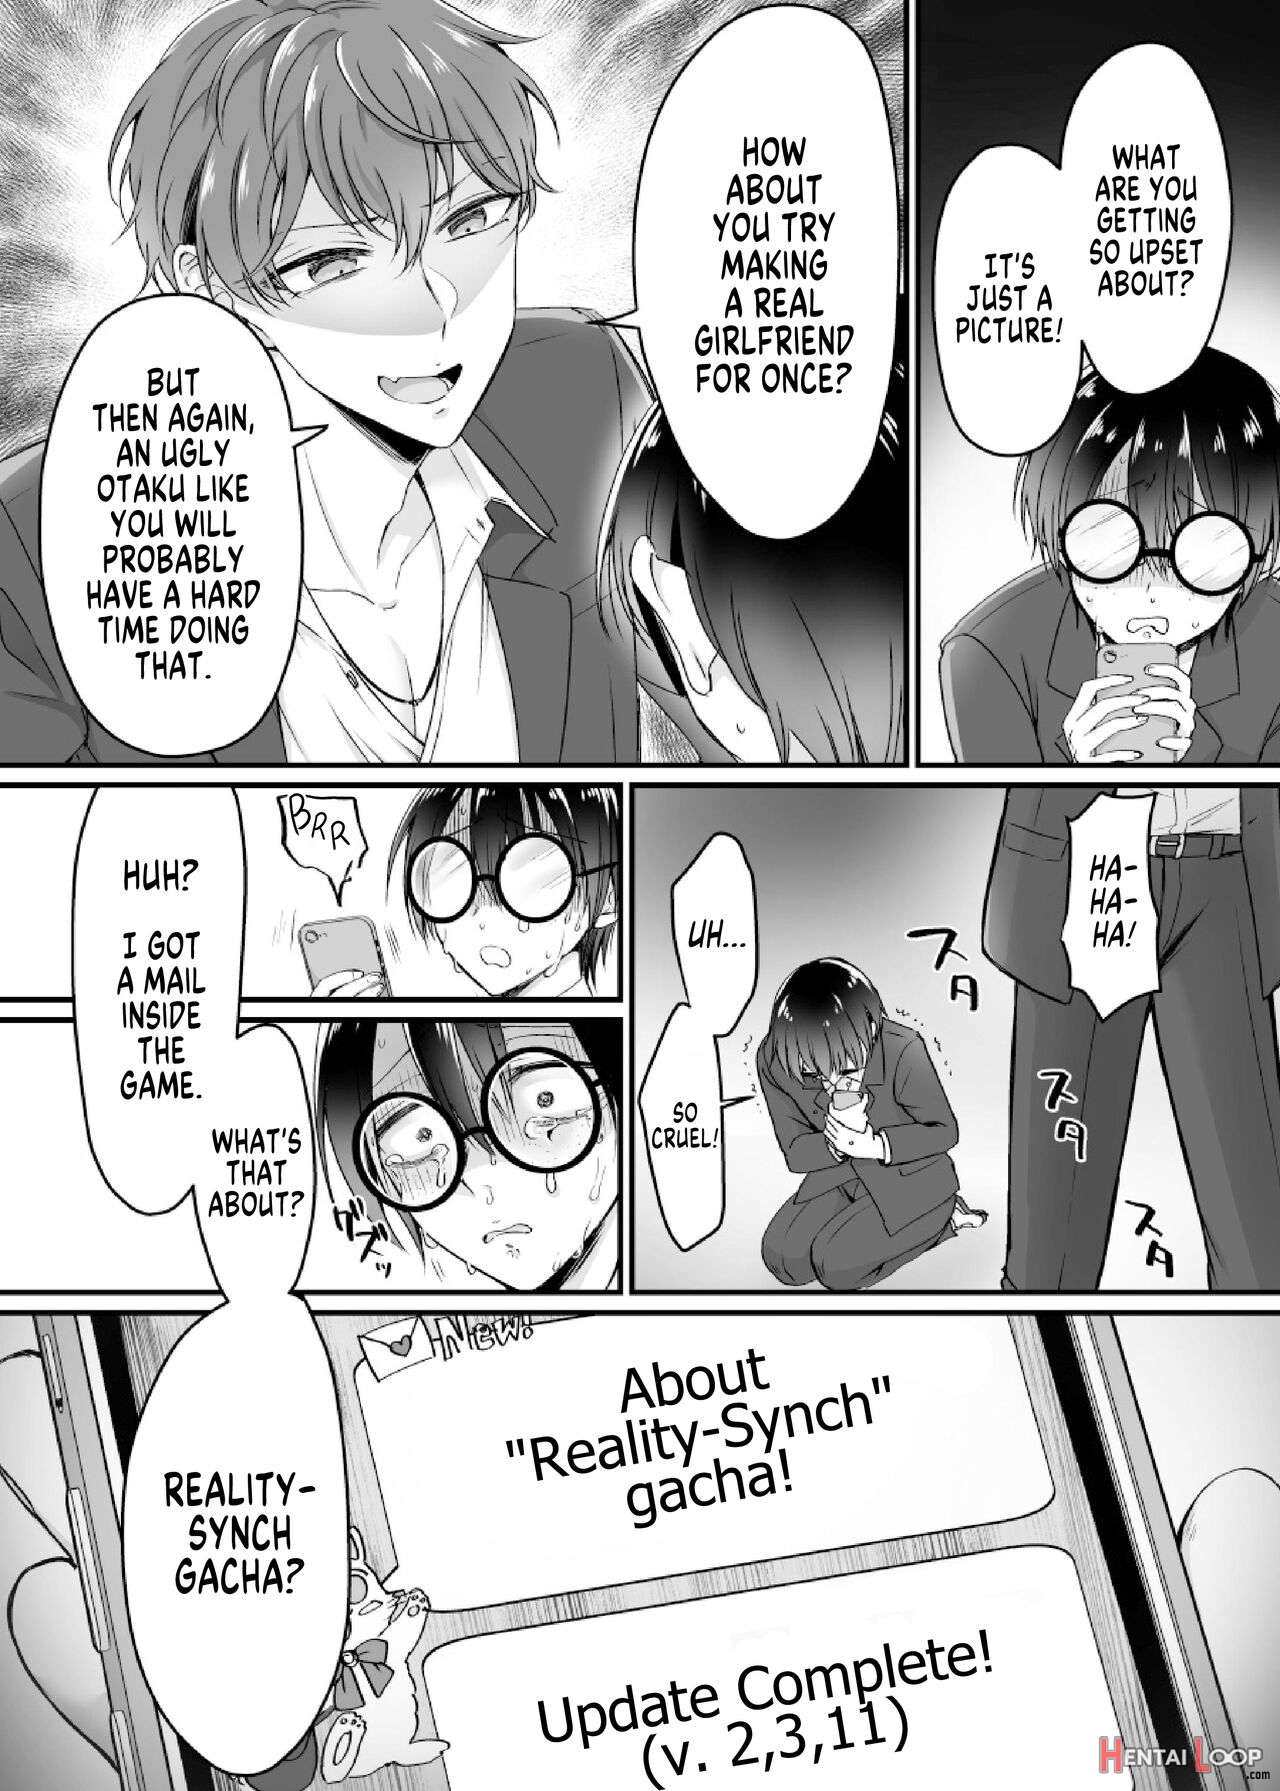 Page 2 of Reality-synch Gacha How I Got Turned Into The Waifu Of A Gloomy  Nerd (by Moegi) - Hentai doujinshi for free at HentaiLoop